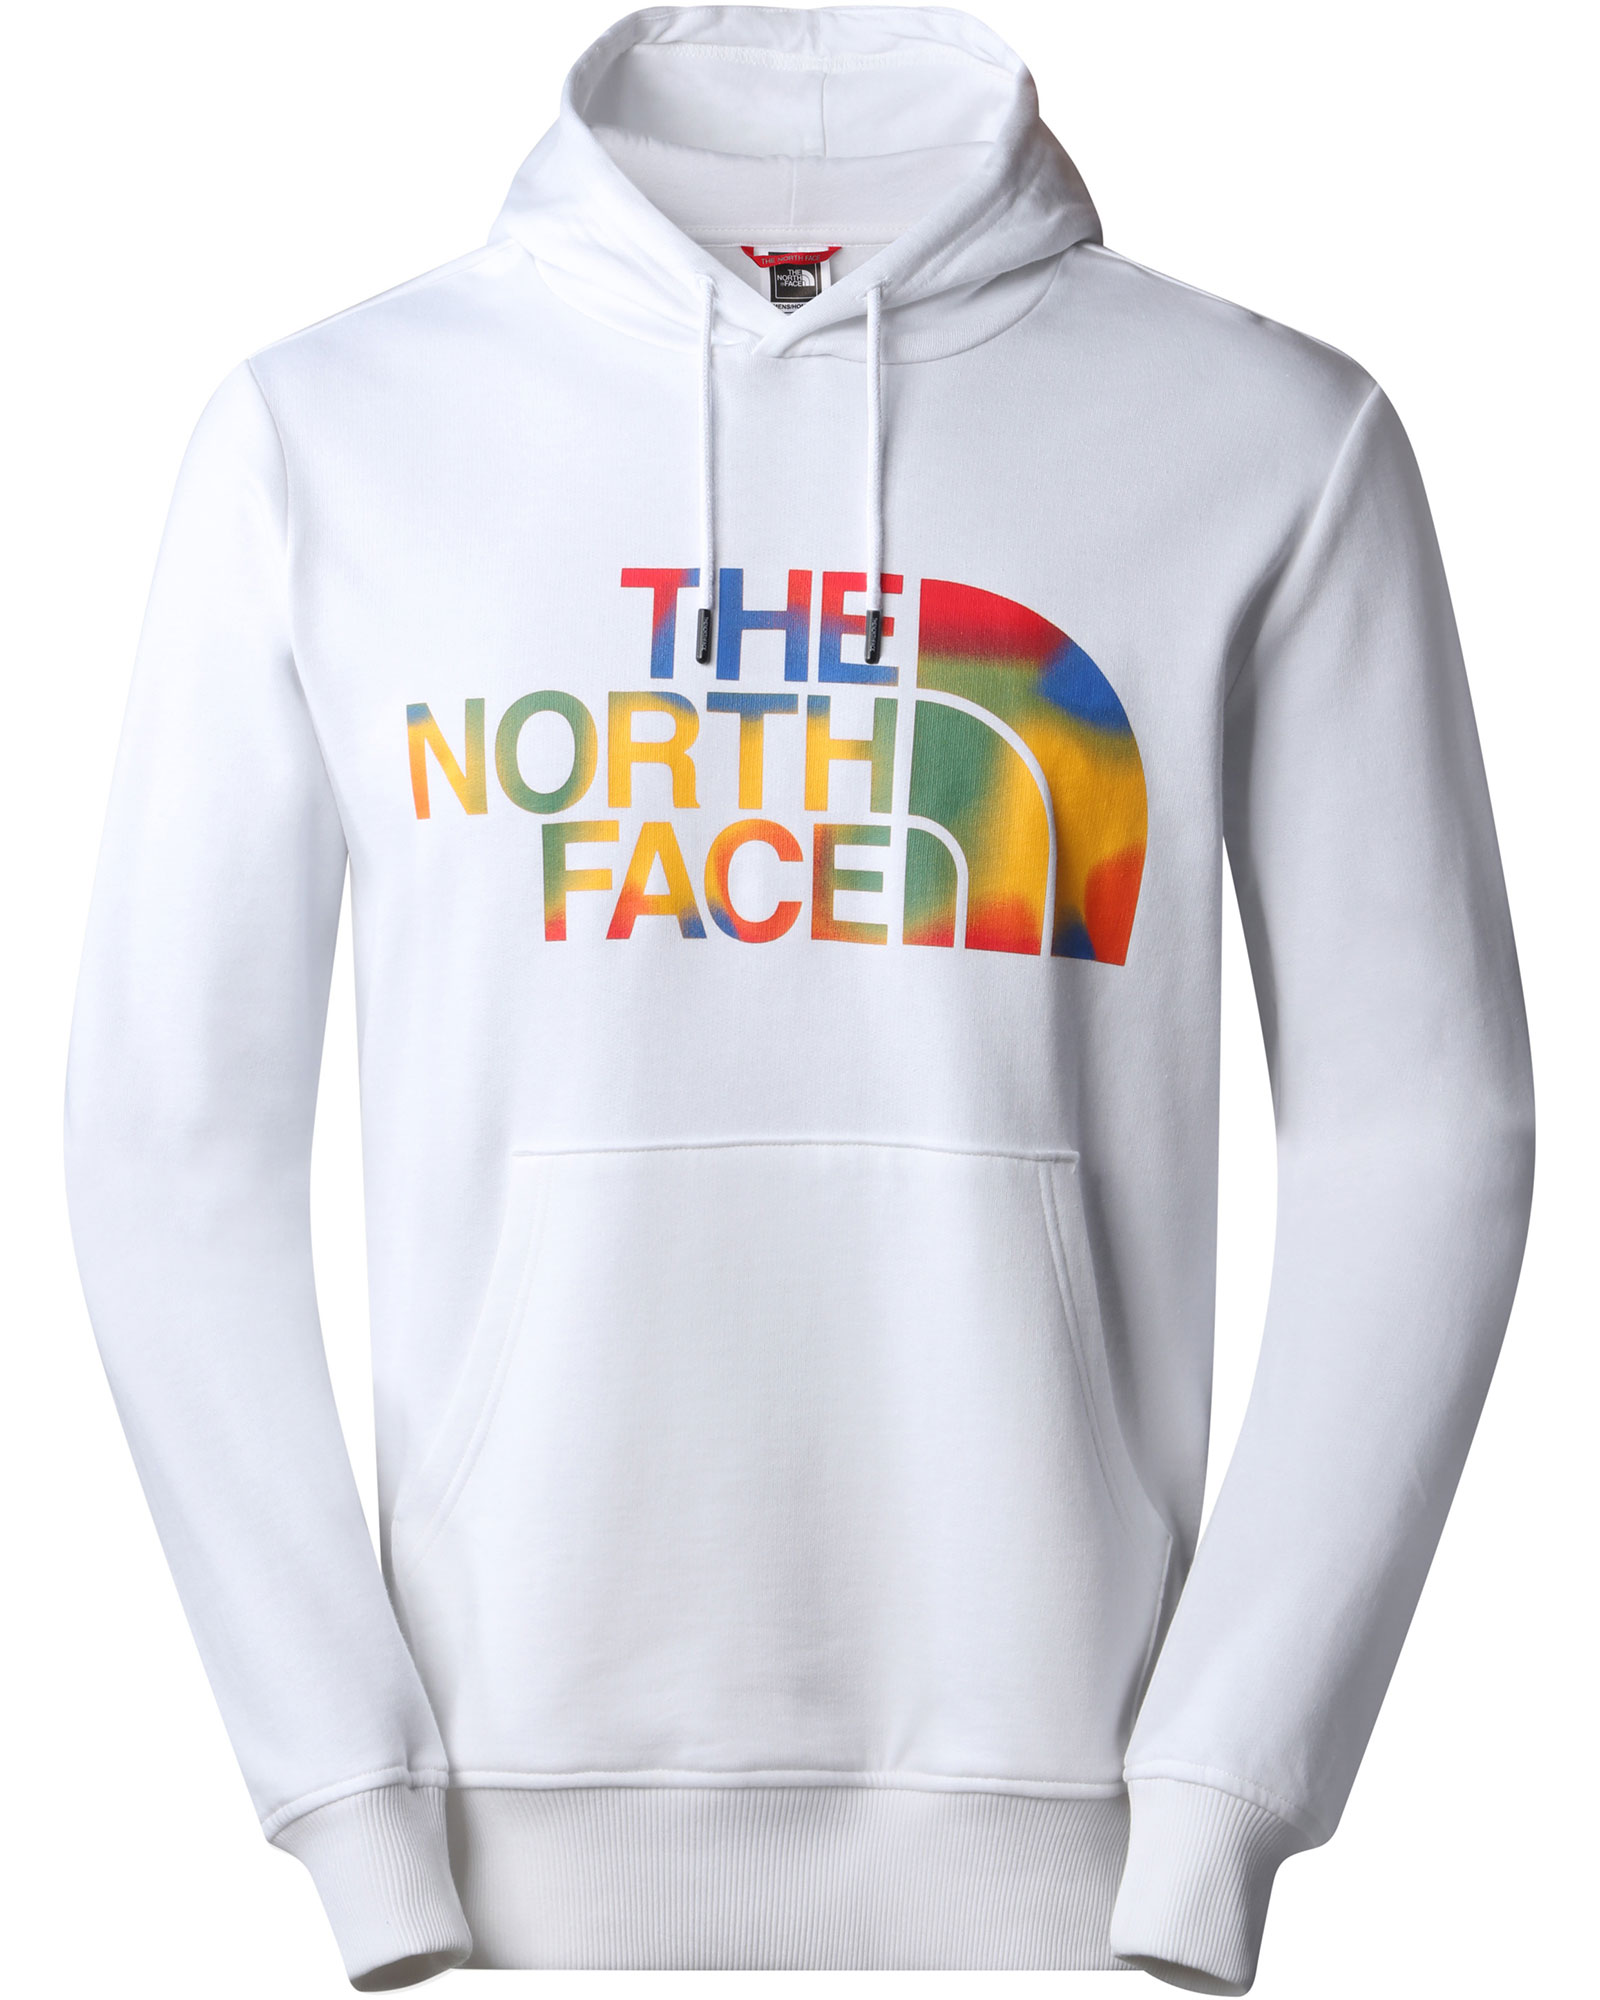 The North Face Men’s Standard Hoodie - TNF White/Super Sonic Print XS